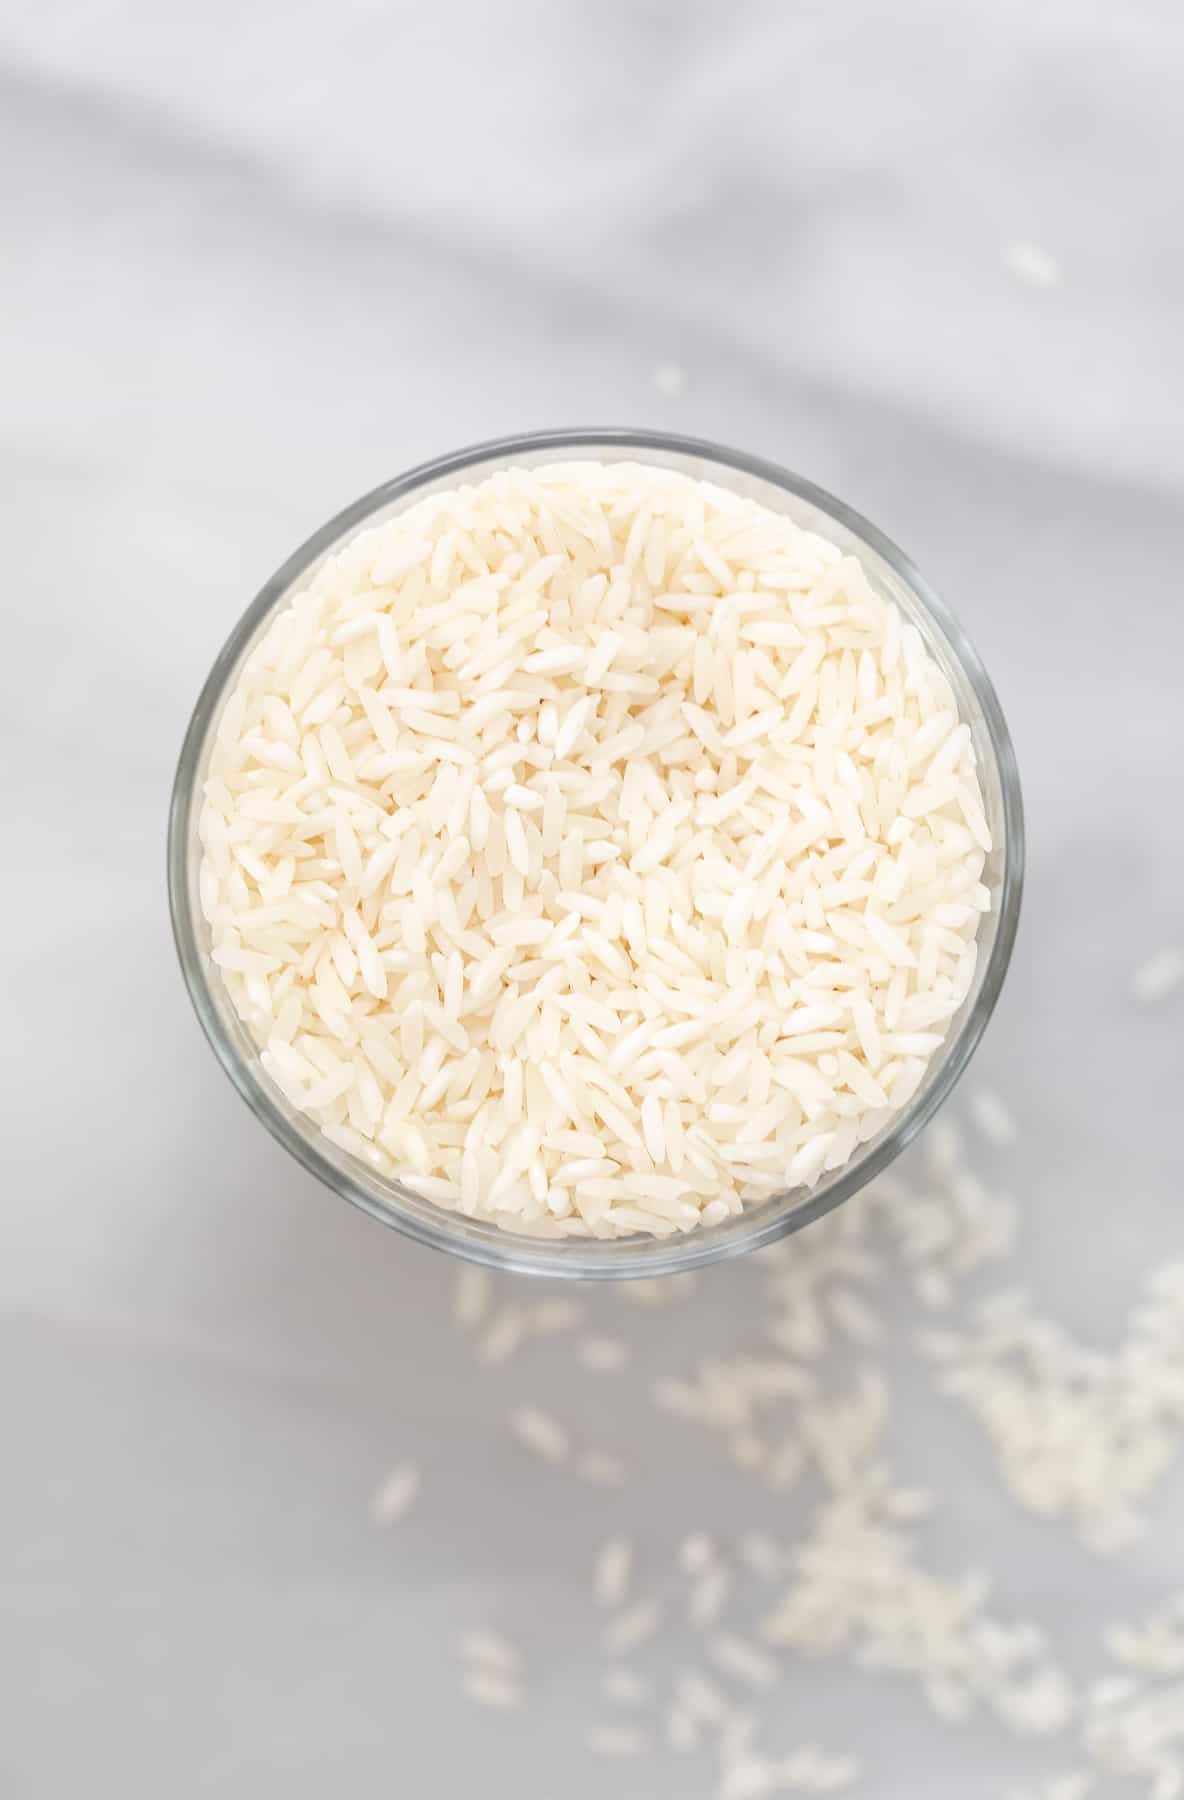 uncooked jasmine rice in a glass cup